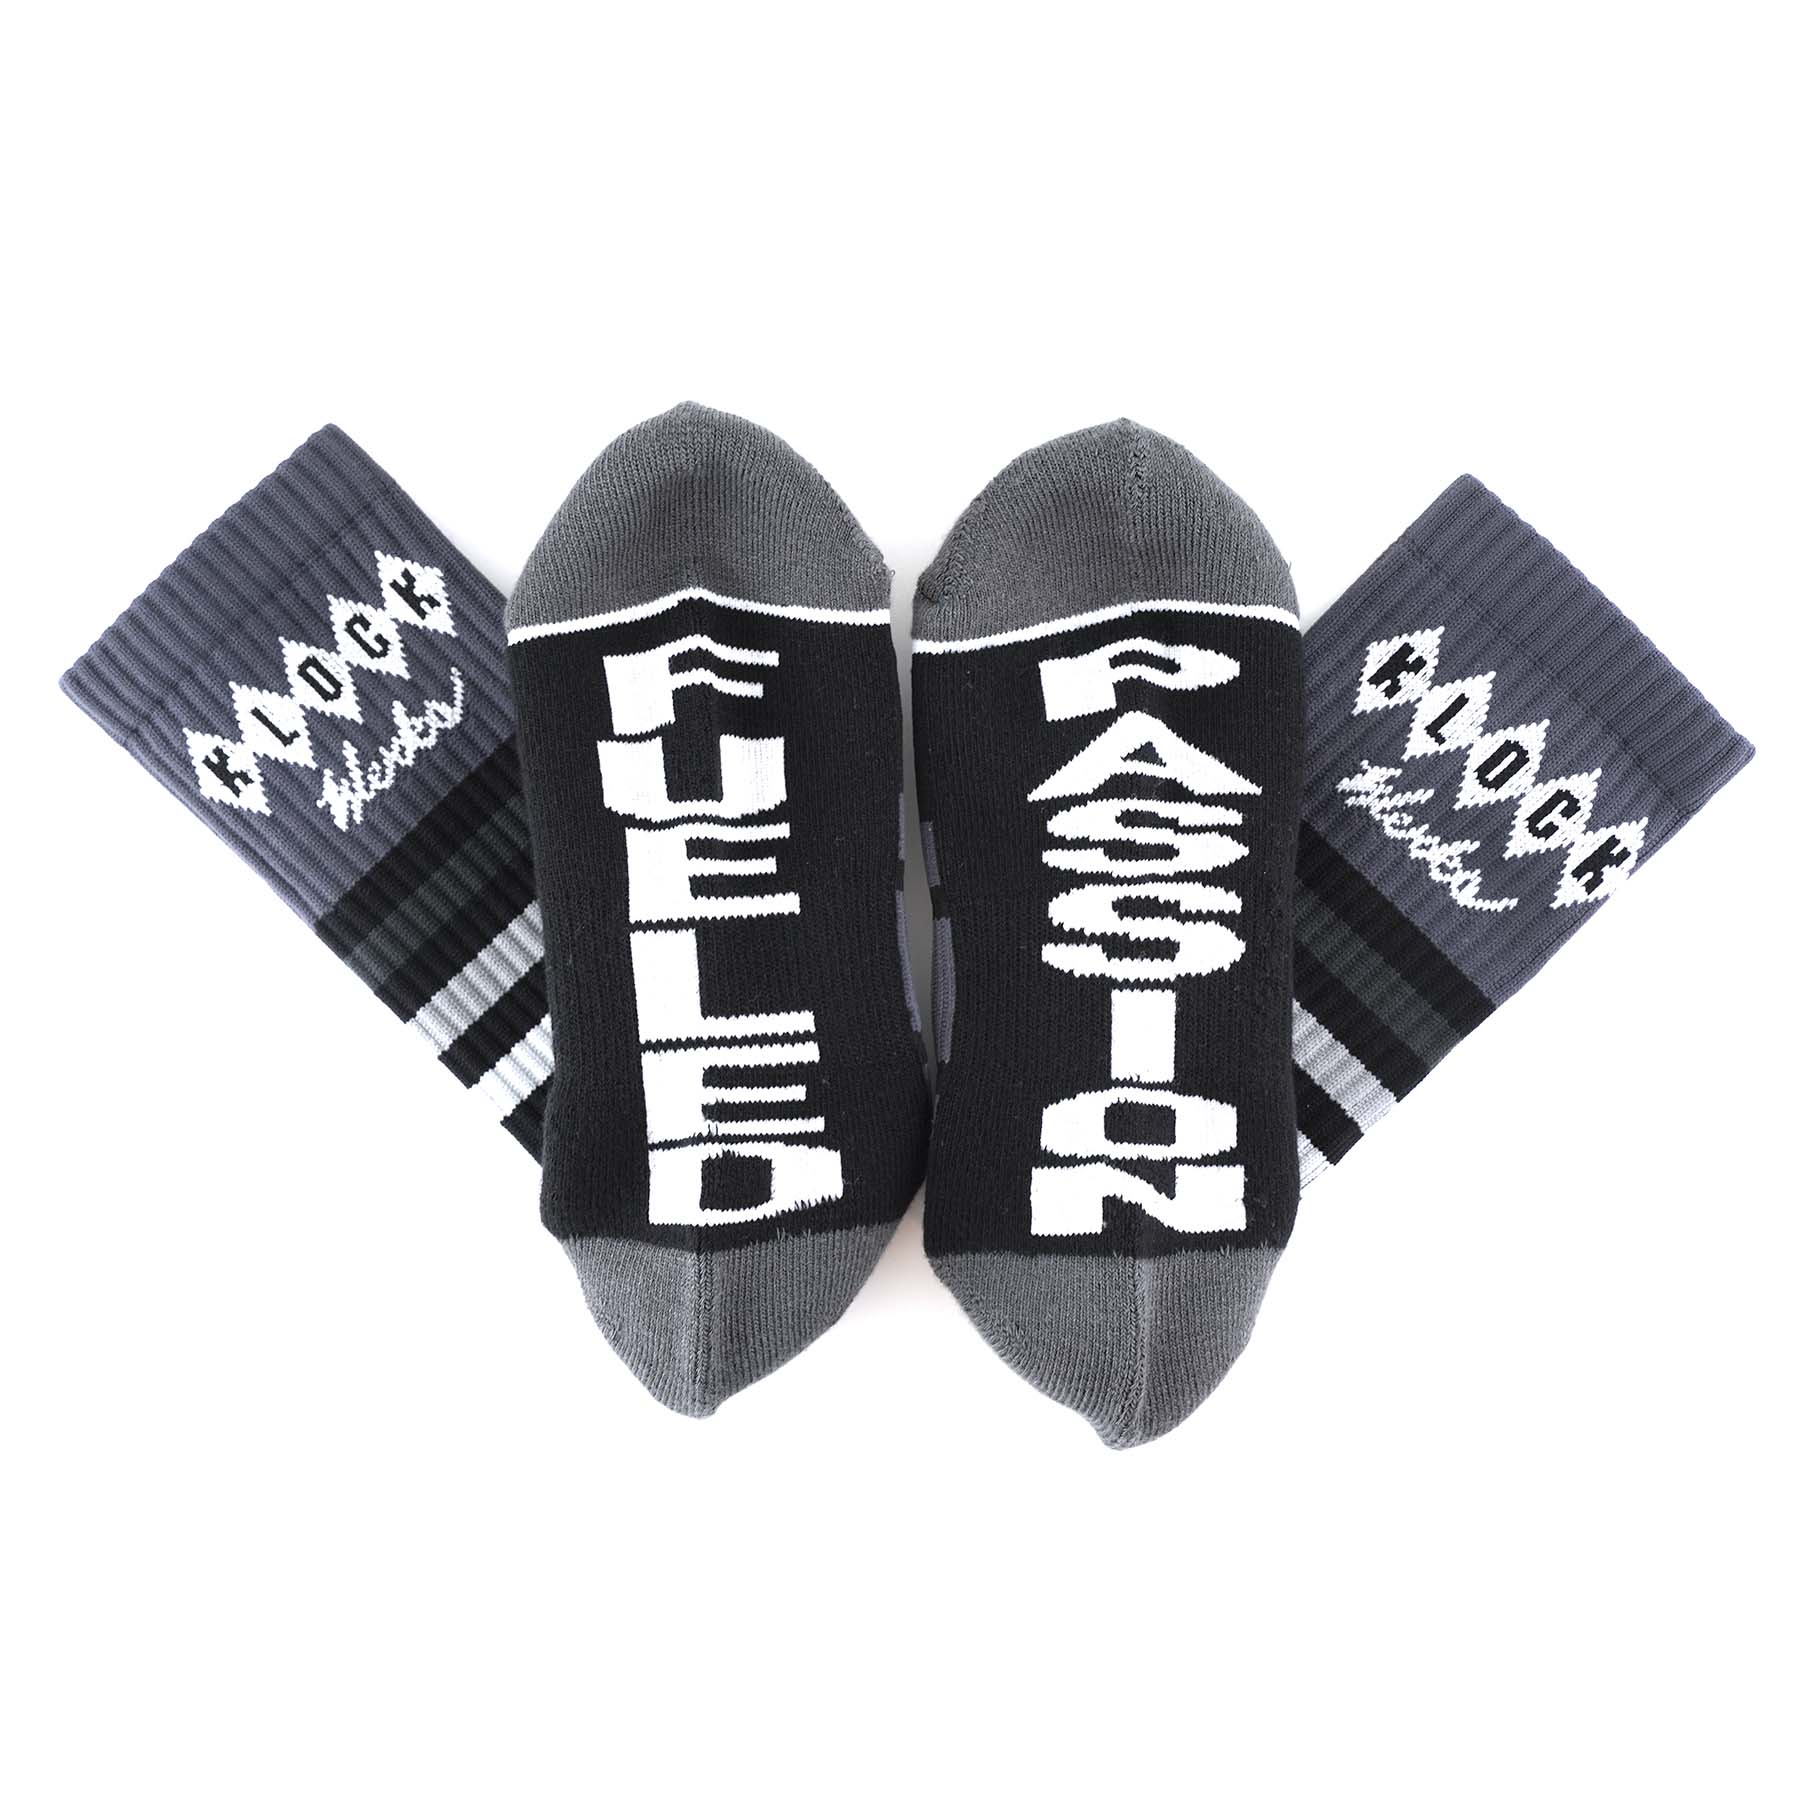 Klock Werks x Fuel Klock Crew Socks in Black with Fueled Passion on the feet.